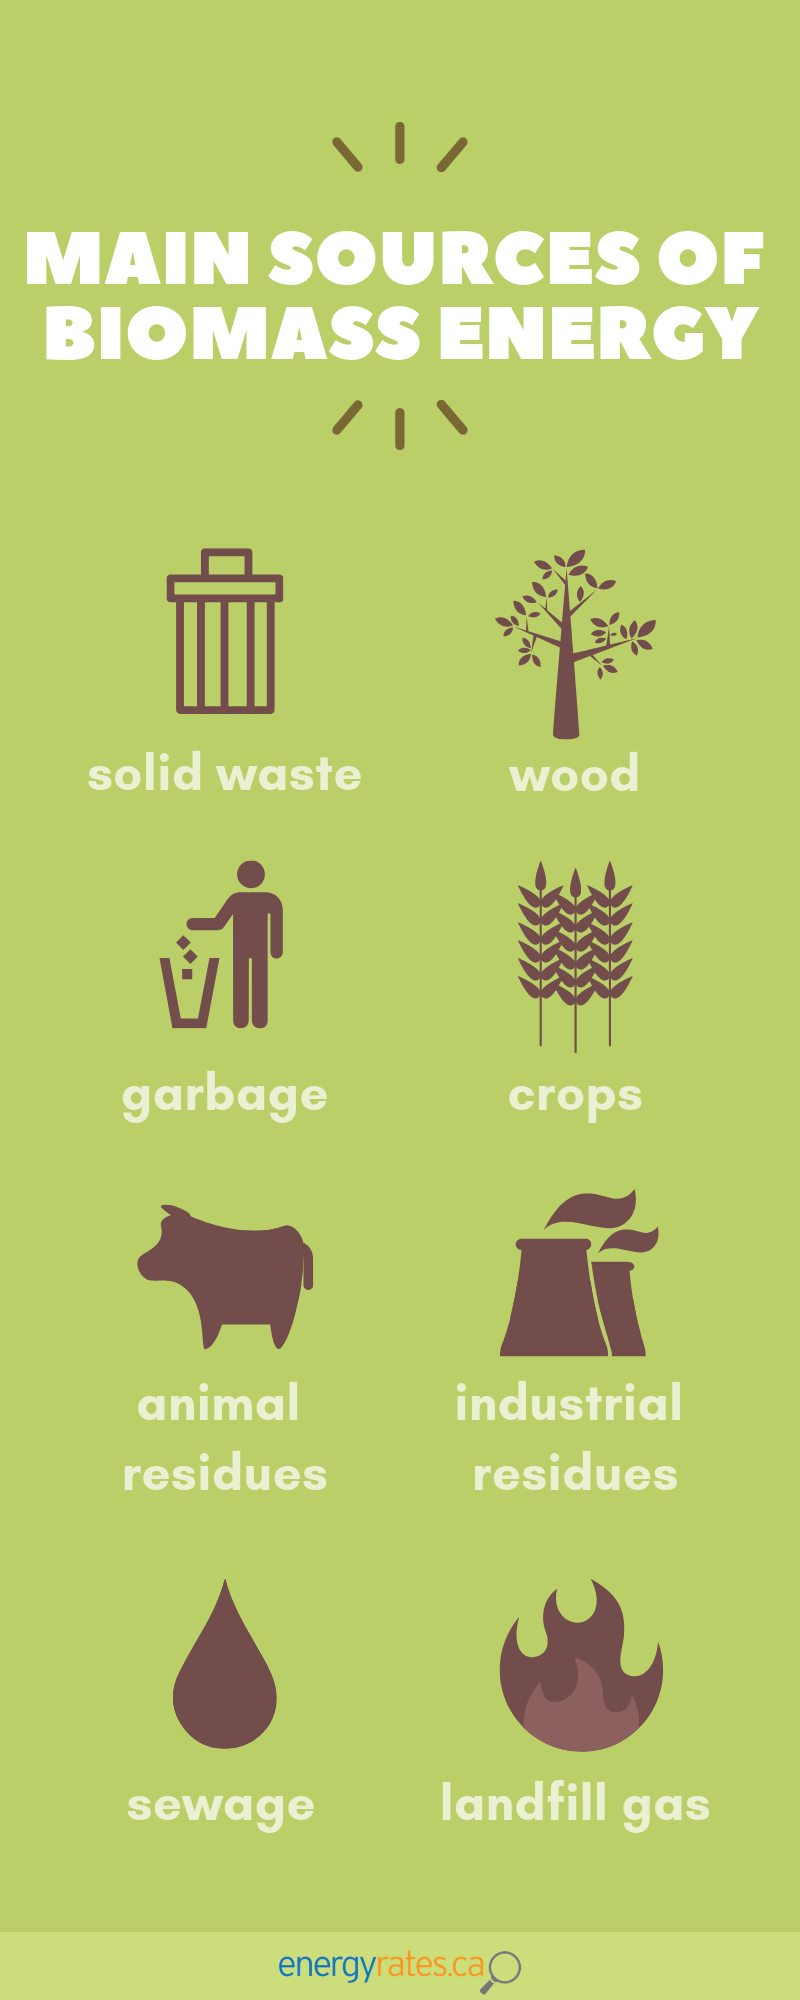 Biomass Energy Sources How Does Biomass Power Works Infographic